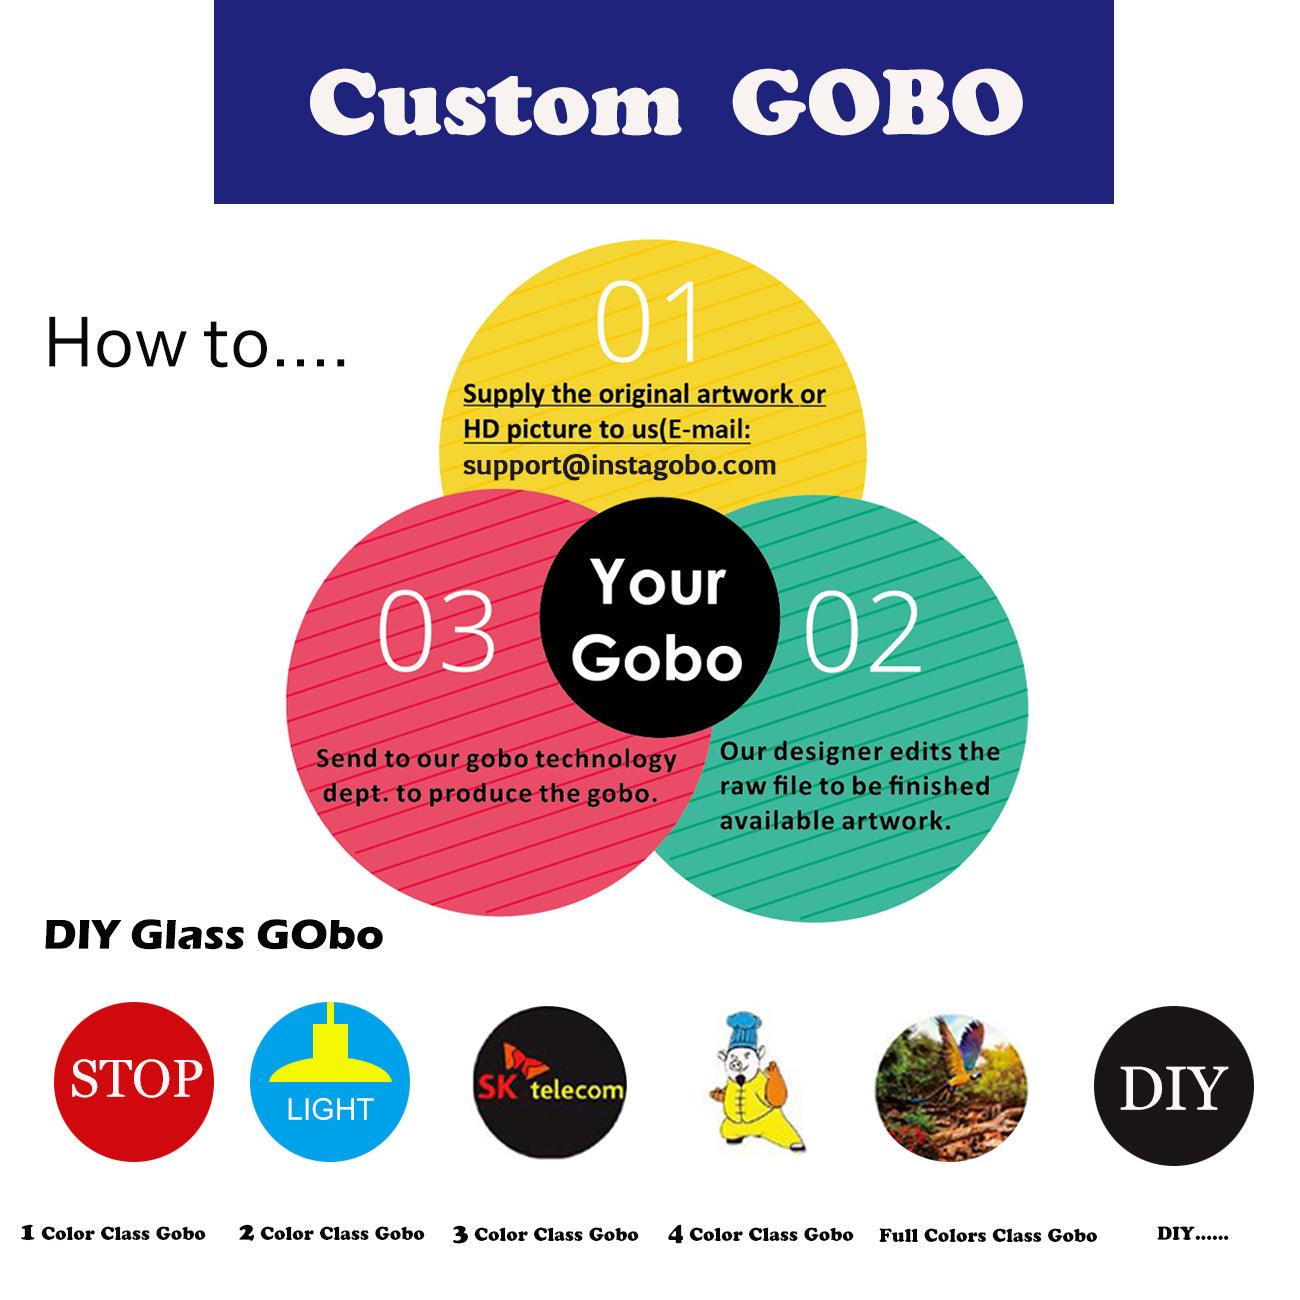 How to get your free gobo?